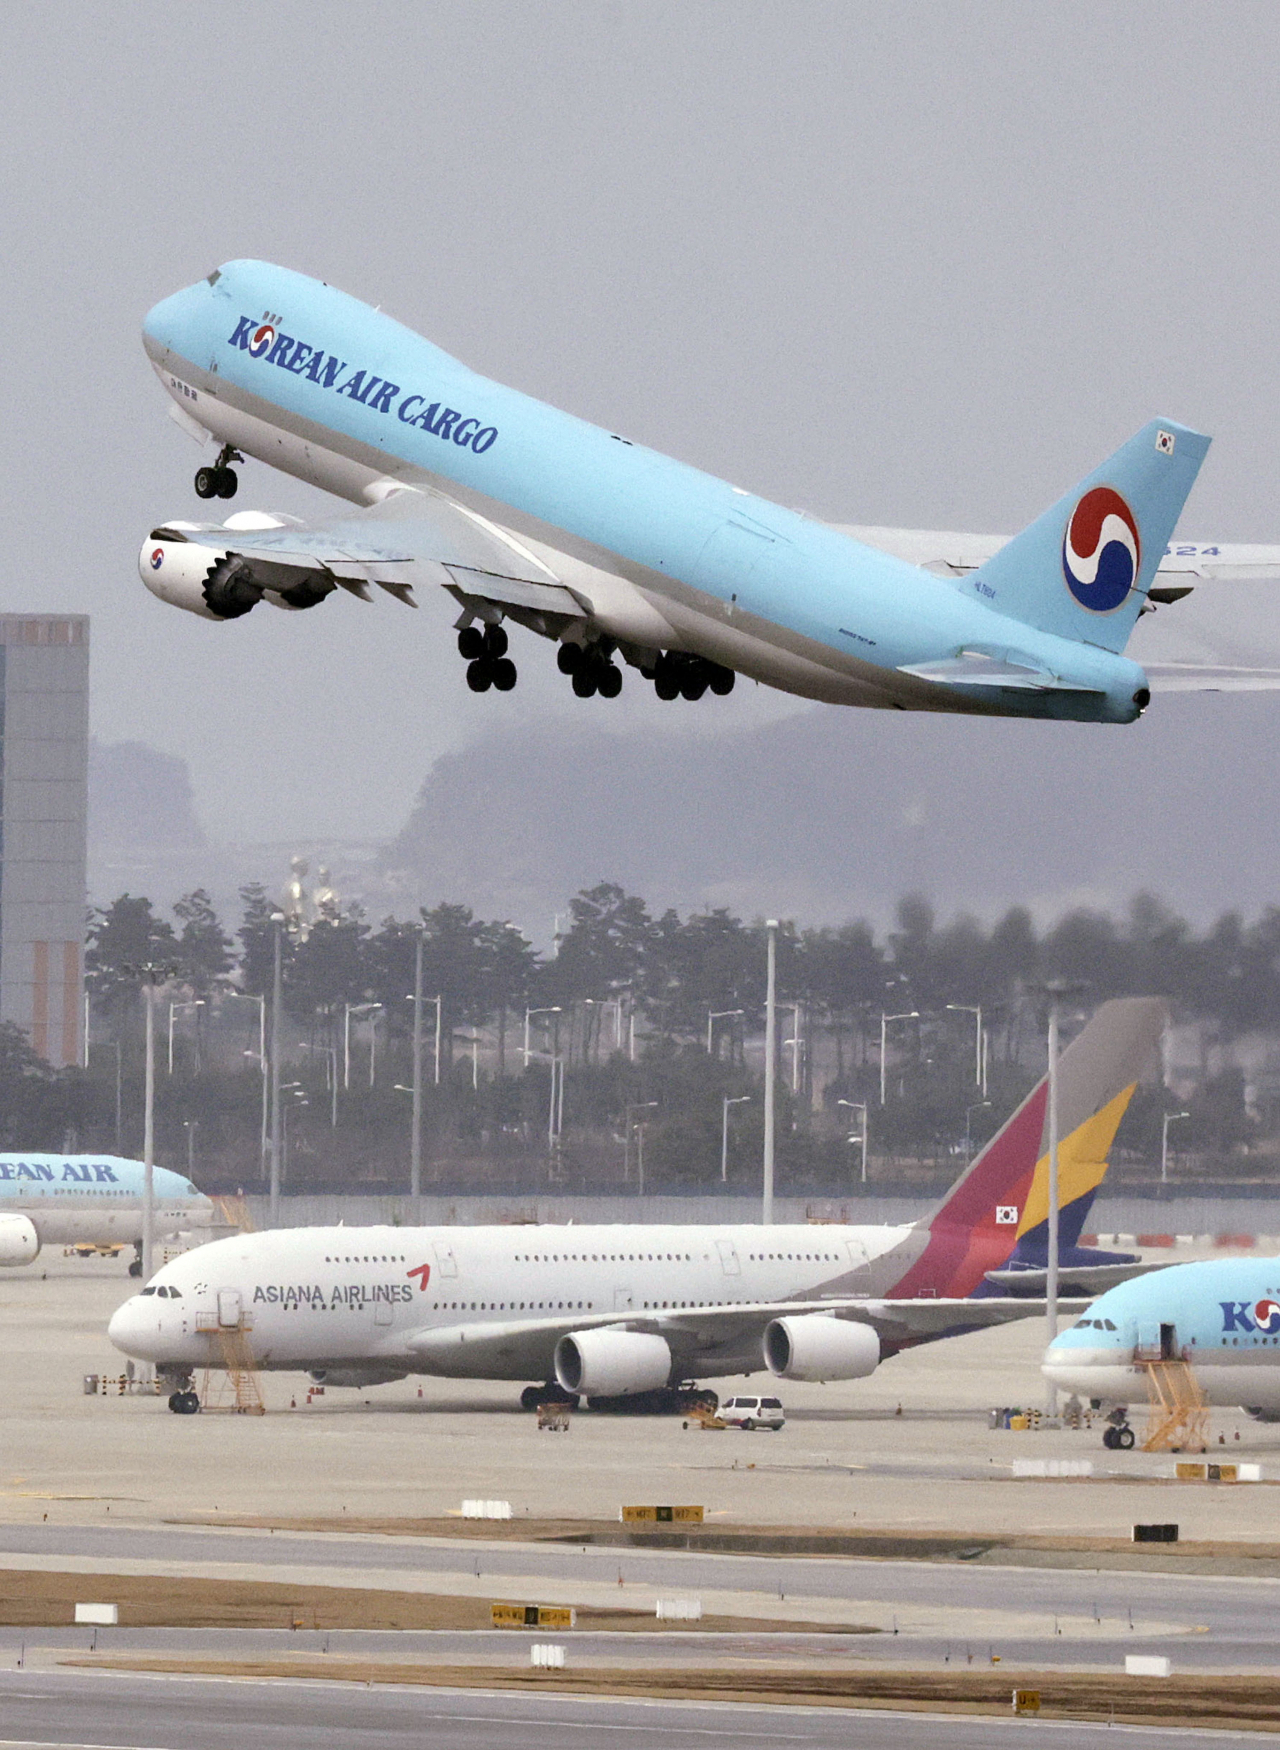 In this unrelated photo from Feb. 14, a Korean Air cargo plane takes off from Incheon Airport. (Newsis)